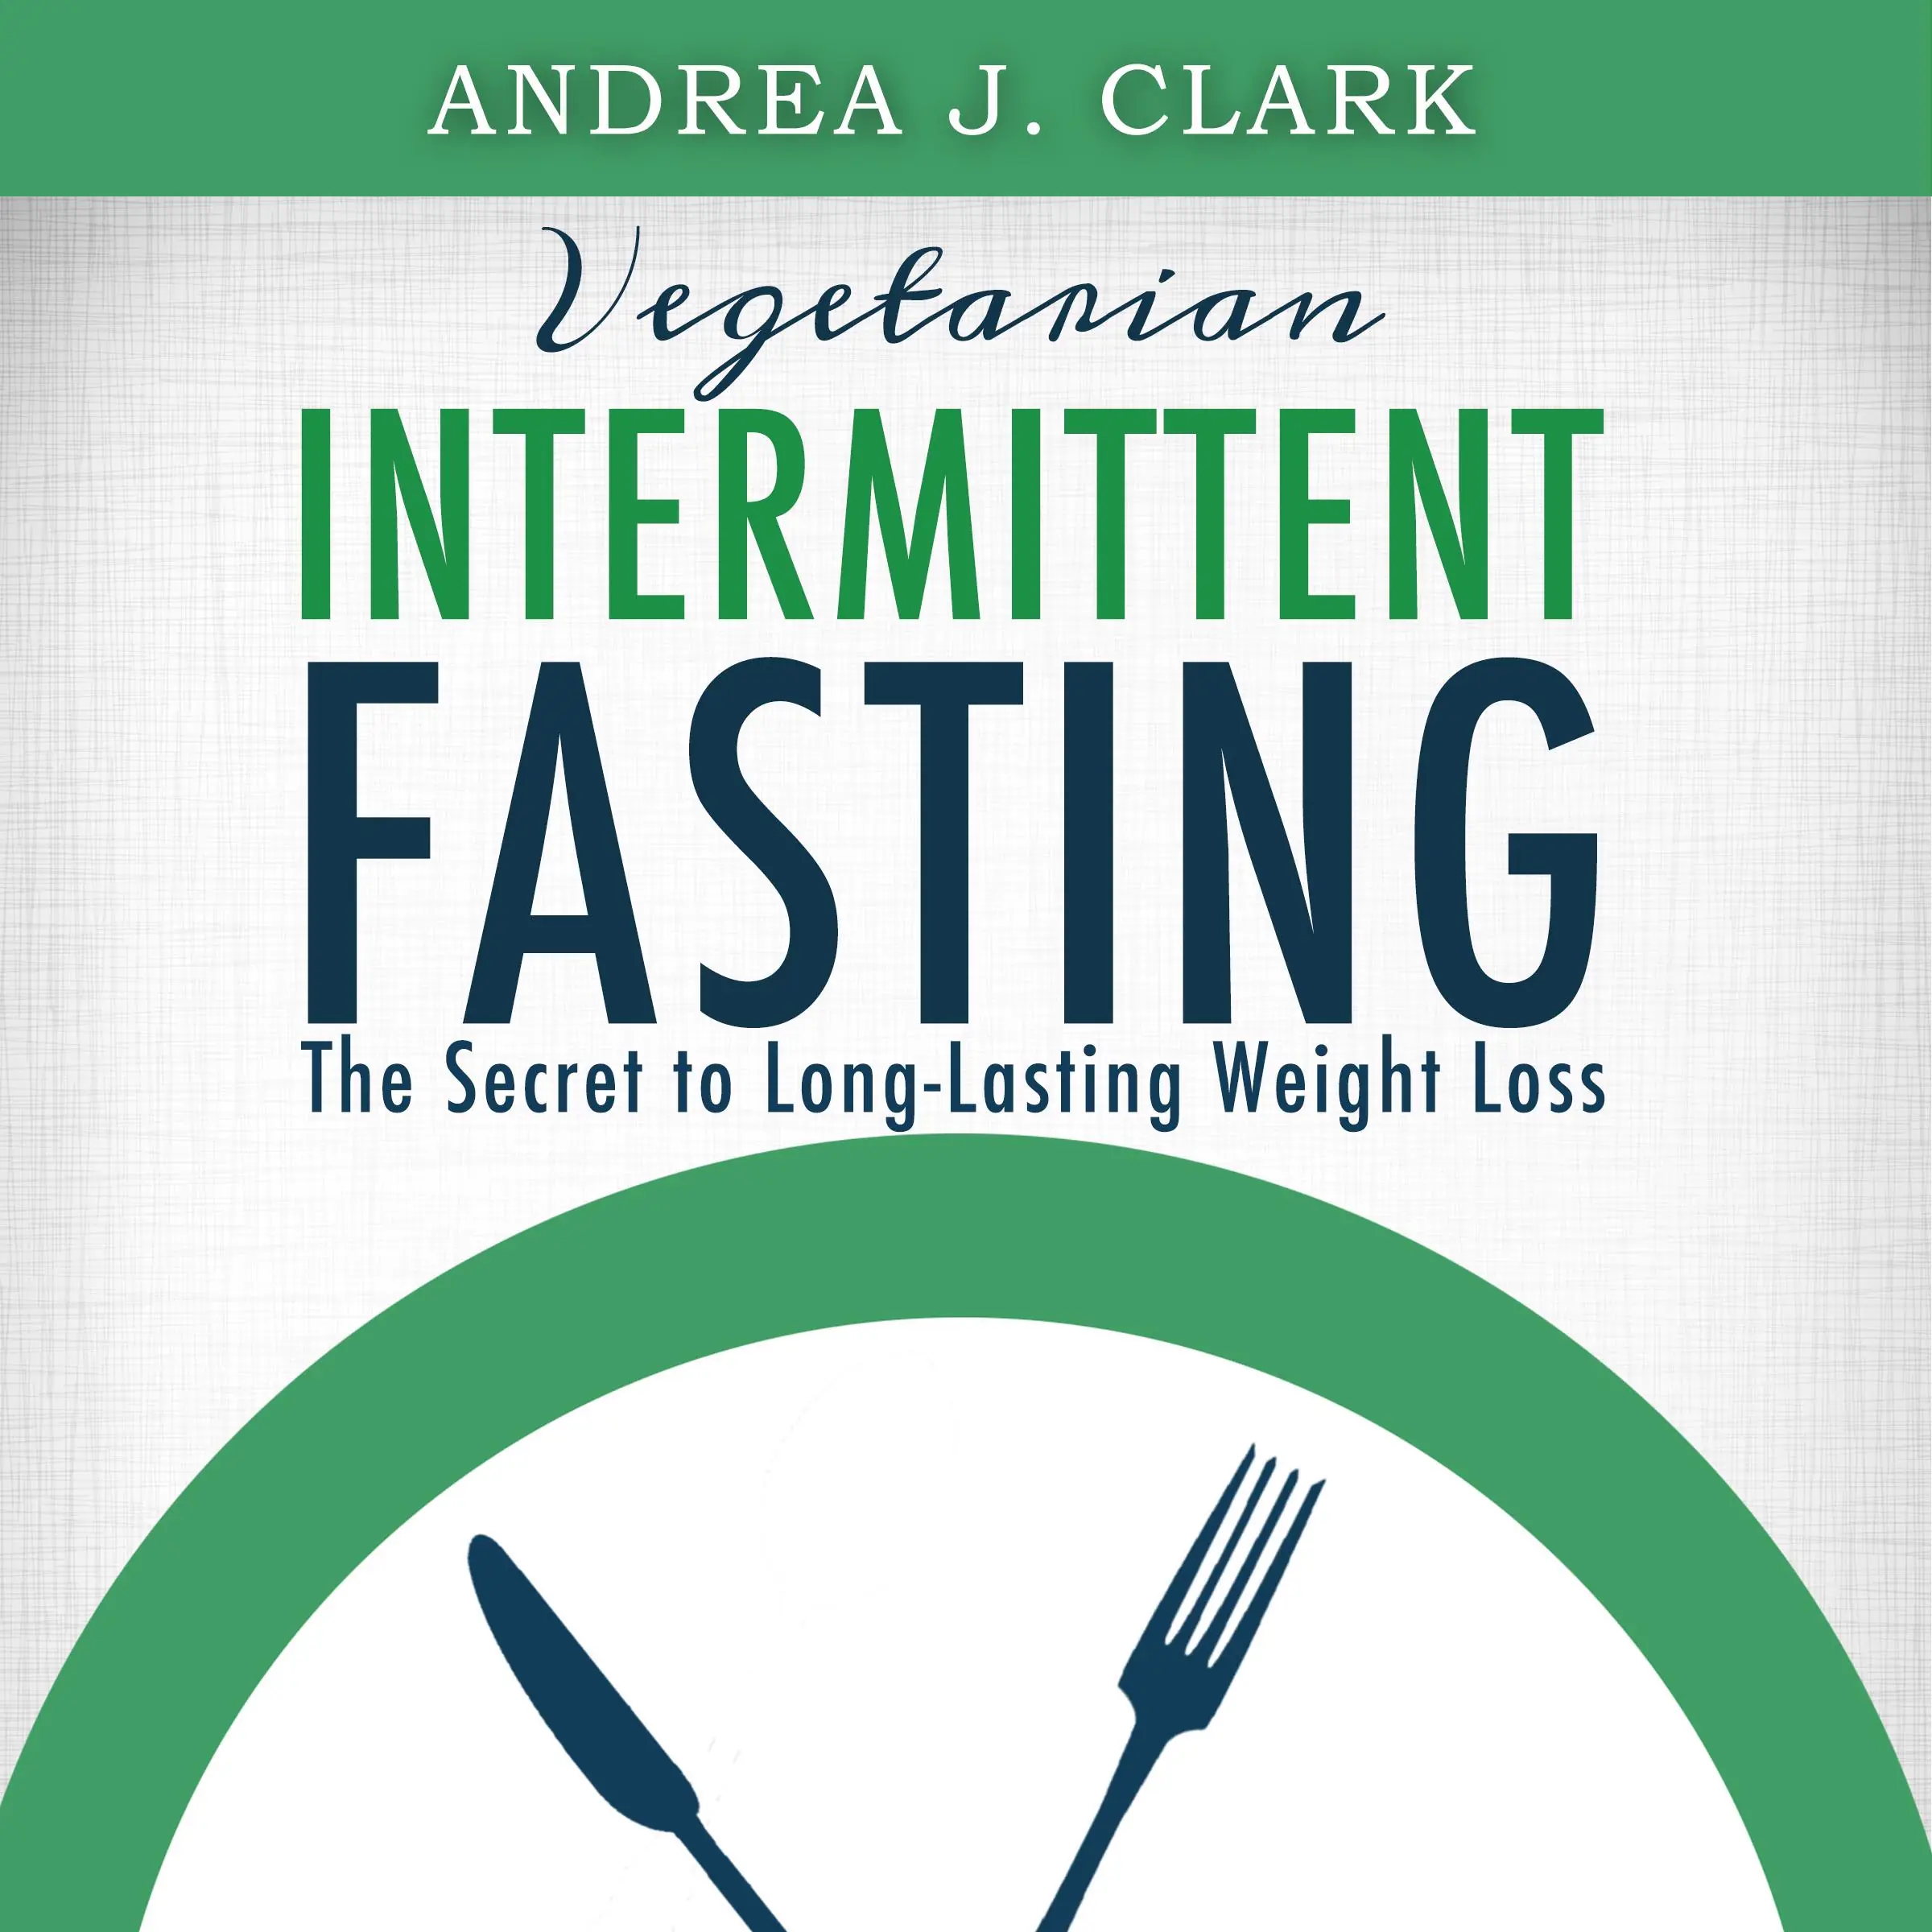 Vegetarian Intermittent Fasting: The Secret to Long-Lasting Weight Loss Audiobook by Andrea J. Clark